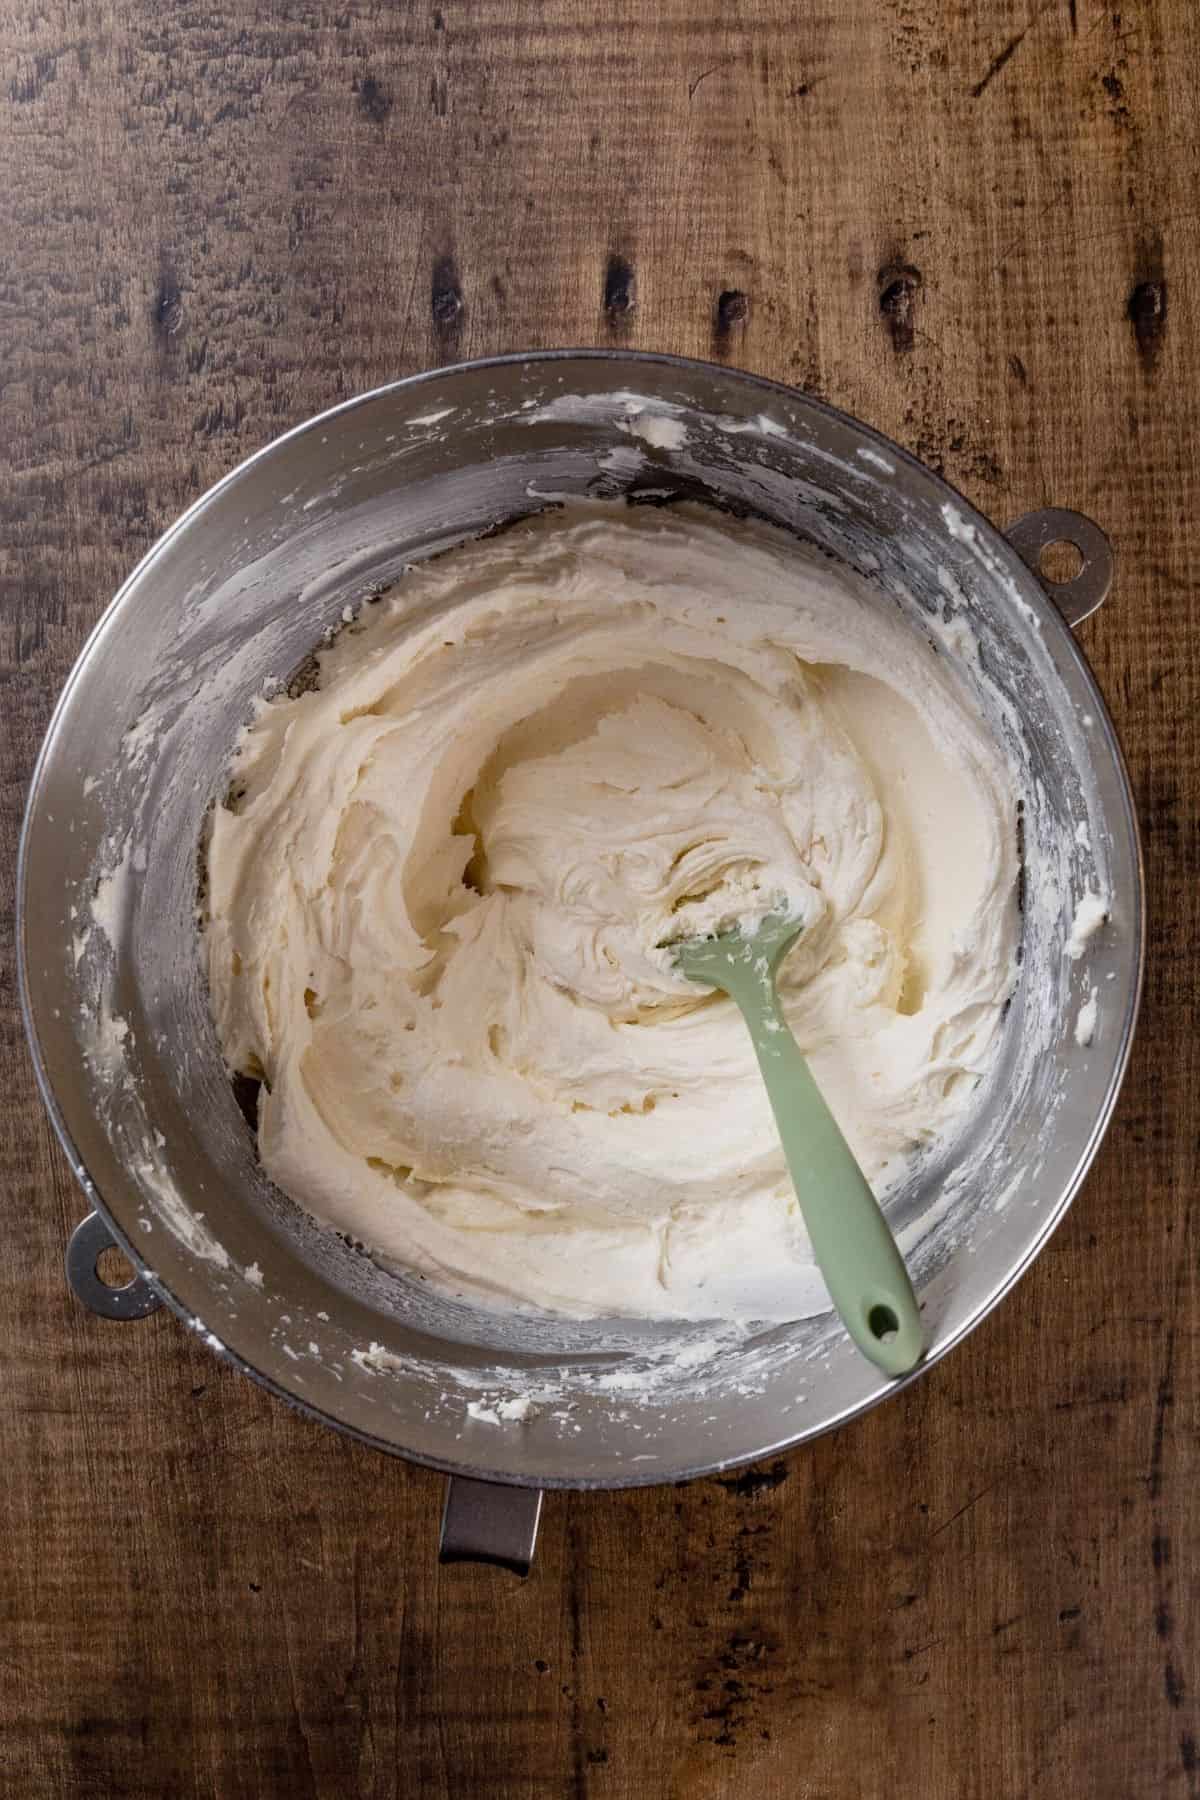 A silver mixing bowl is filled with finished vegan frosting. It sits on a wood table. A green spatula is in the frosting.